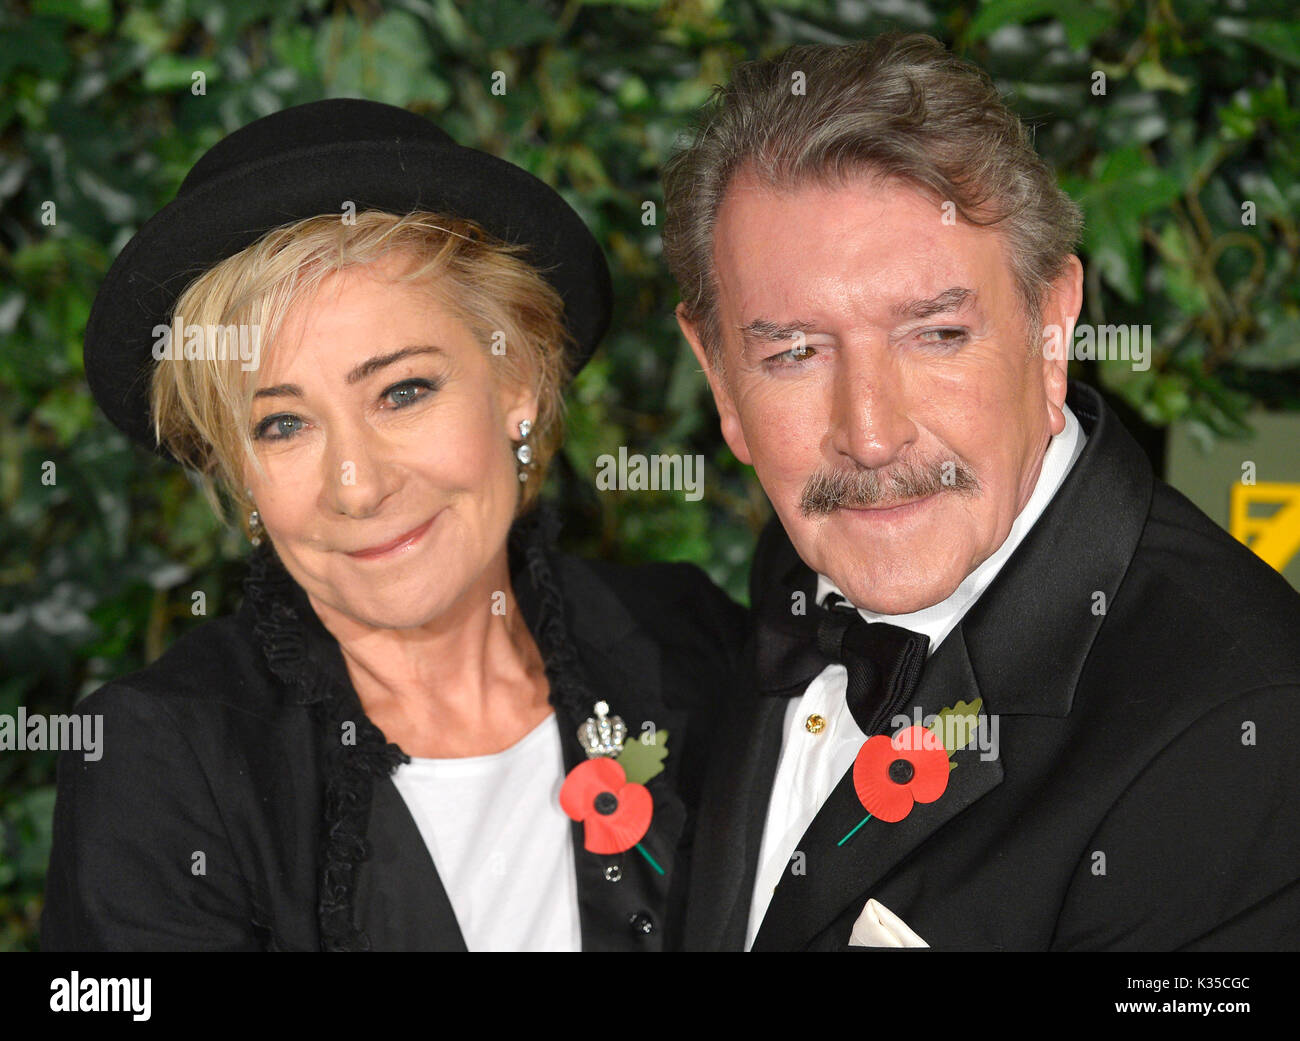 Photo Must Be Credited ©Alpha Press 080004 13/11/2016 Zoe Wanamaker and Husband Gawn Grainger at The London Evening Standard Theatre Awards 2016 held at The Old Vic Theatre in London. Stock Photo